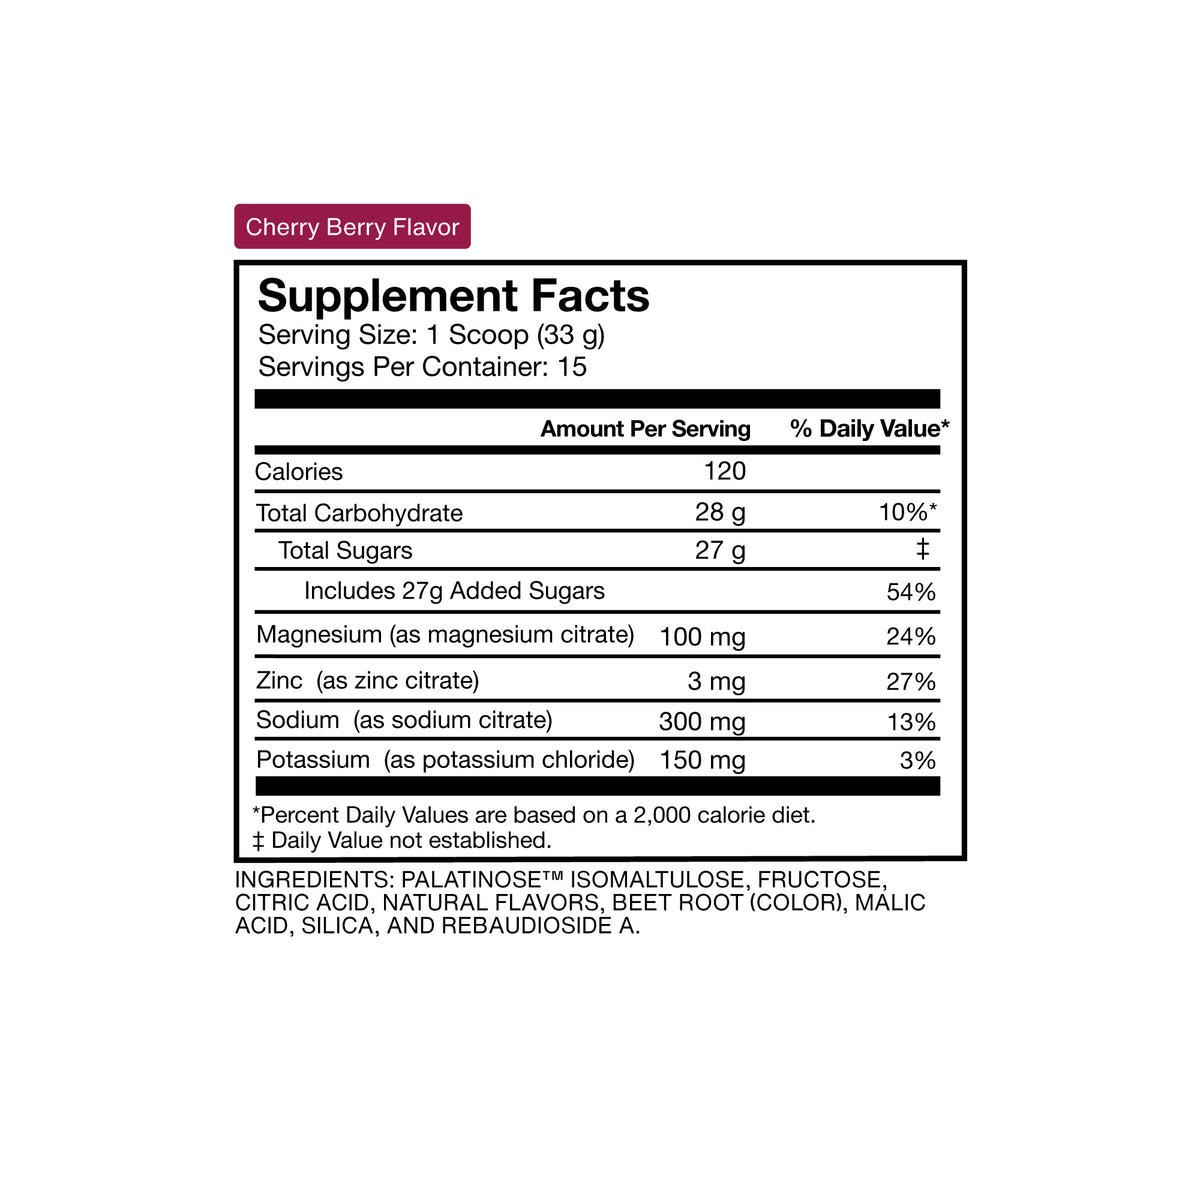 Cherry Berry Flavored Fuel Supplement Facts